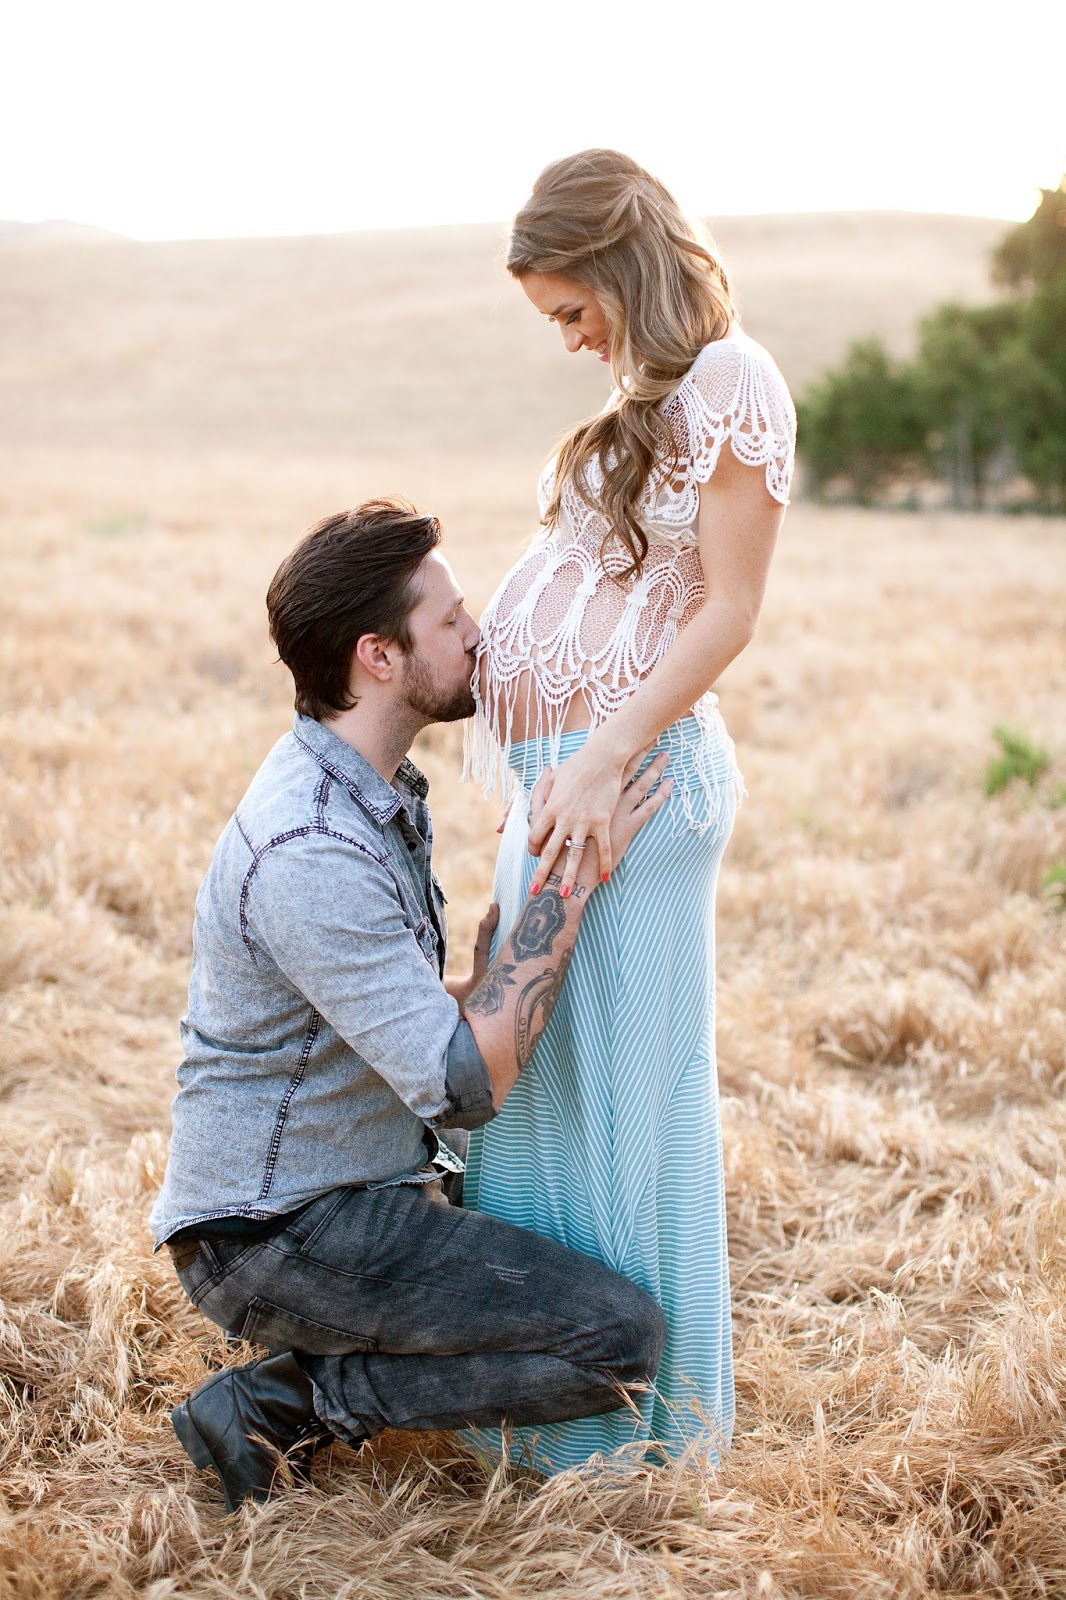 TESSA RAYANNE: Maternity Photoshoot: Celebrating Our First ...
 Beautiful Pregnancy Photo Ideas